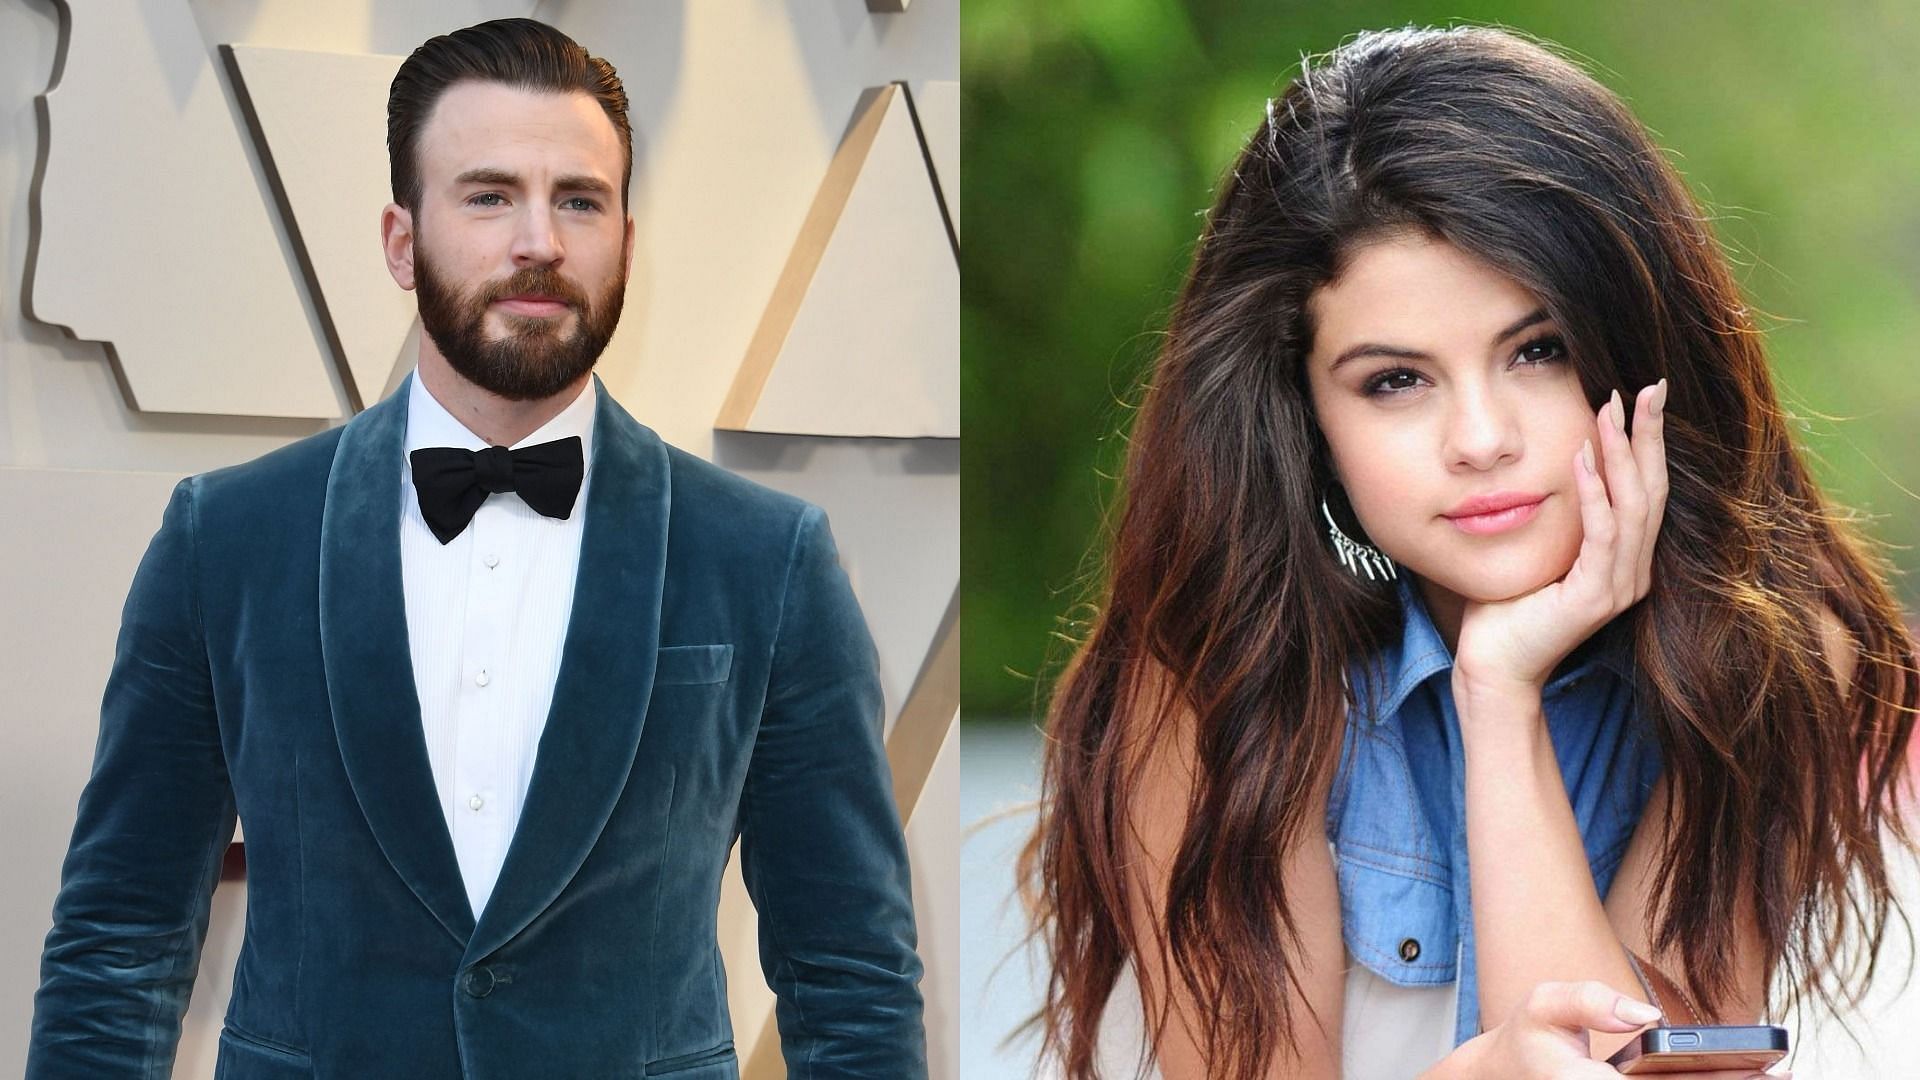 Chris Evans and Selena Gomez have sparked romance rumors once again (Image via Getty Images)